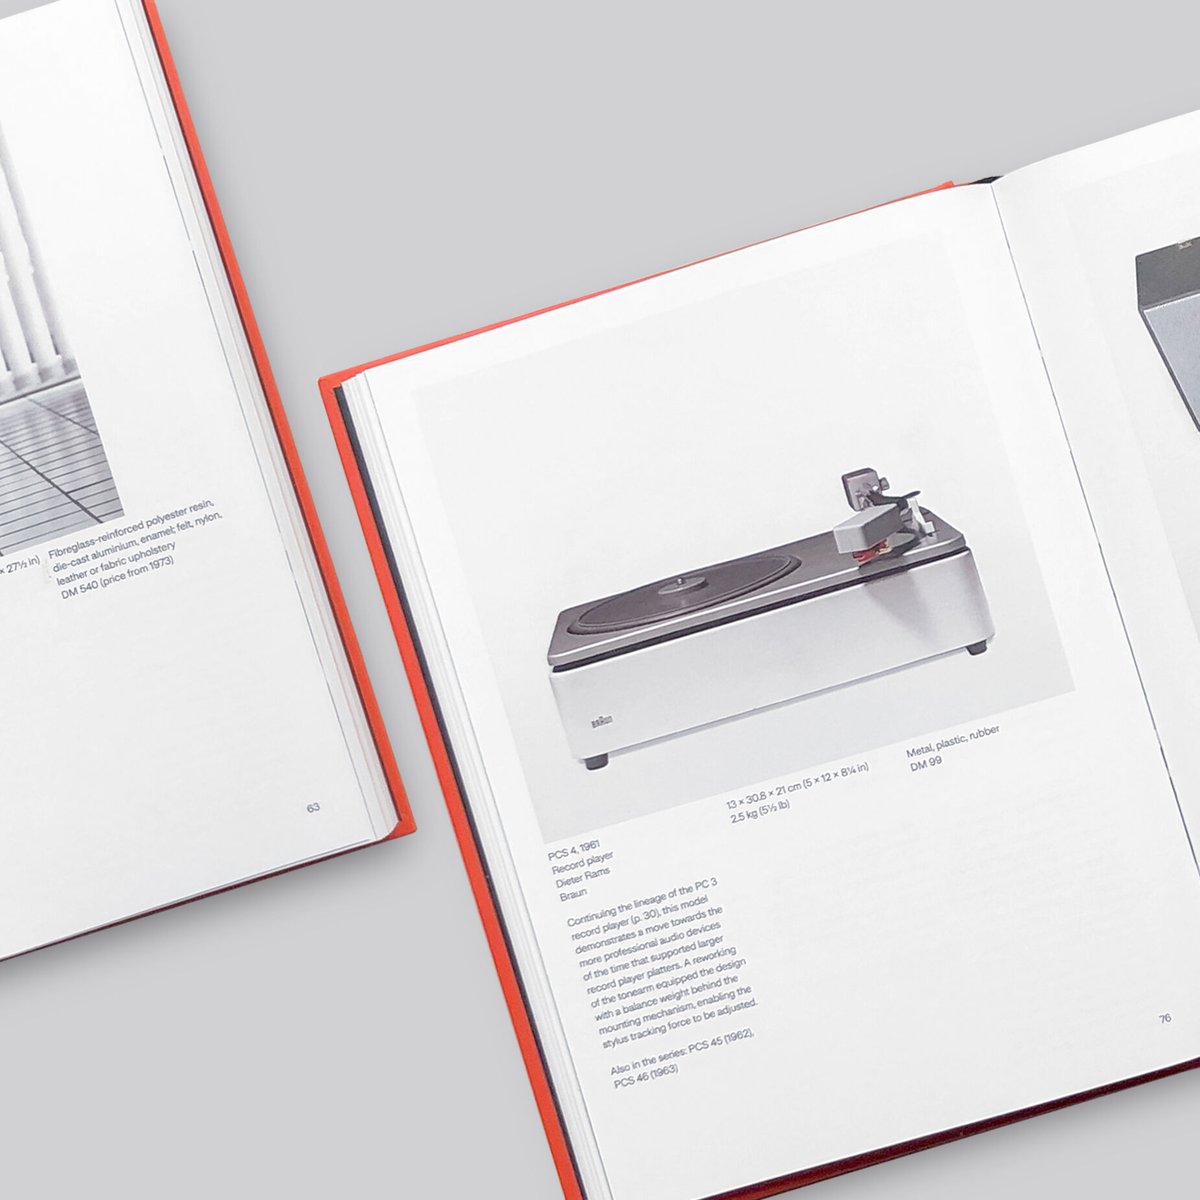 Dieter Rams / The Complete Works | POST